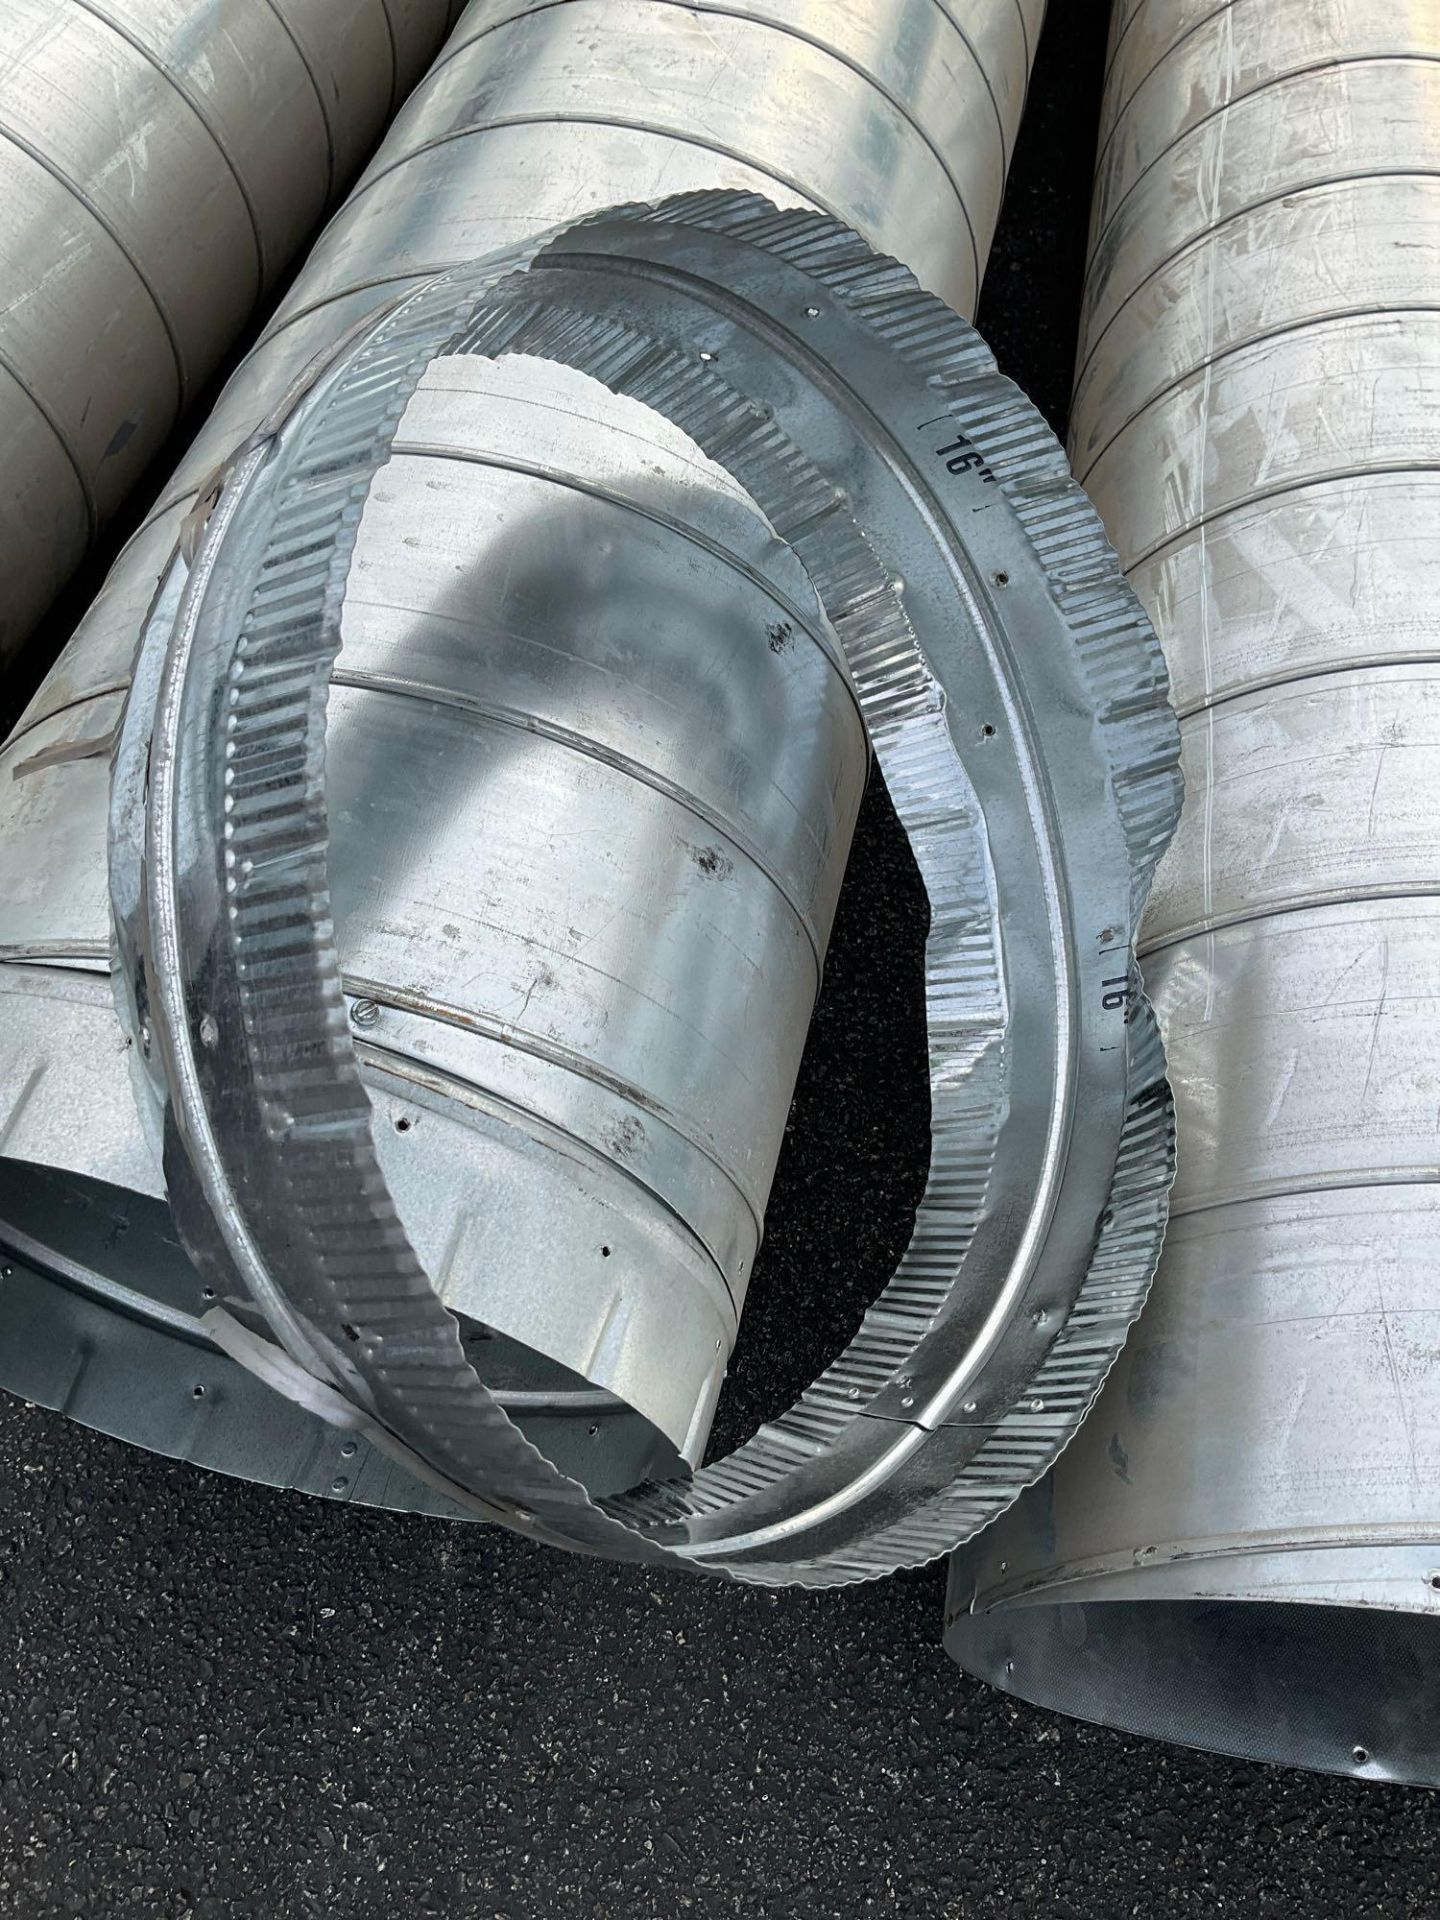 ASSORTED HVAC DUCT - Image 16 of 20